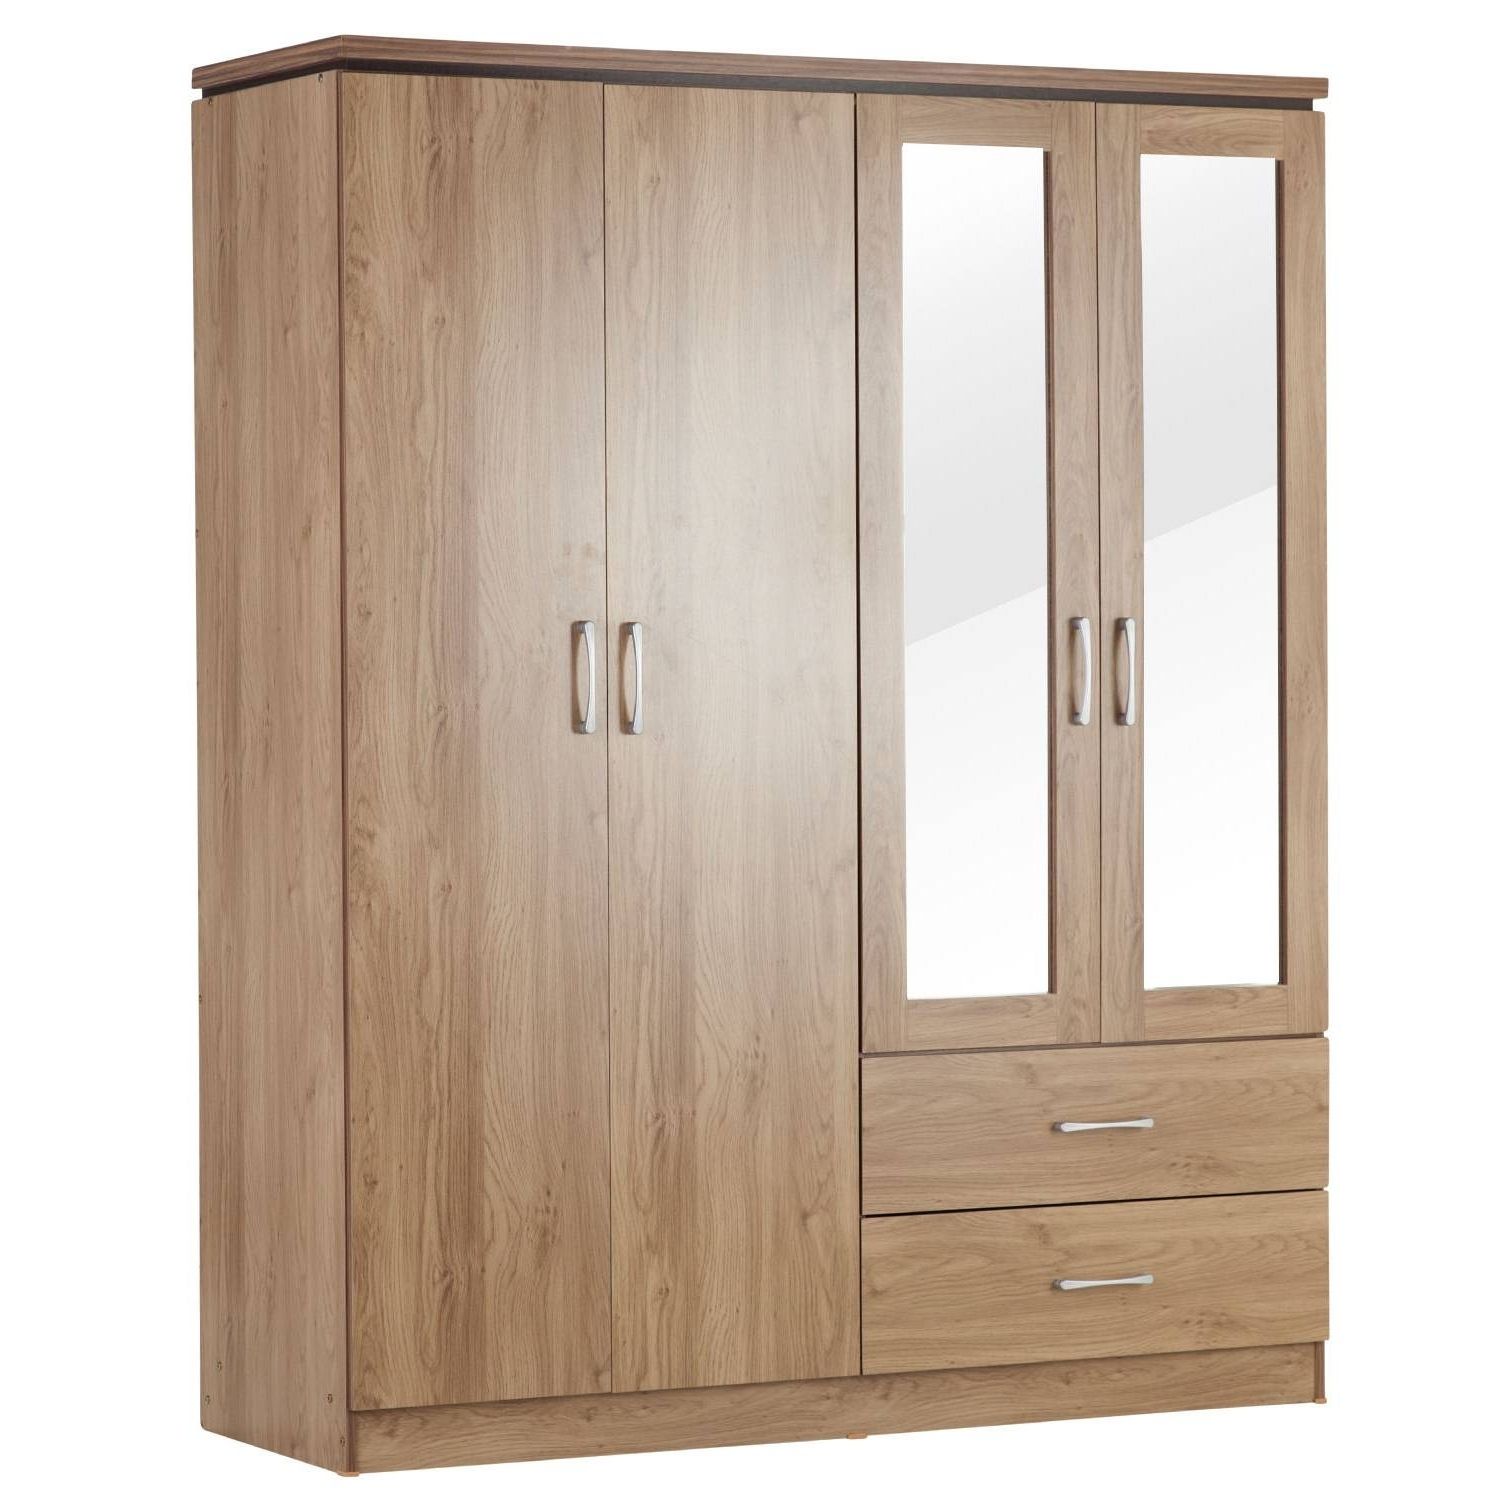 Well Known Wardrobes With 4 Doors In Charles 4 Door Wardrobe – Next Day Delivery Charles 4 Door (View 15 of 15)